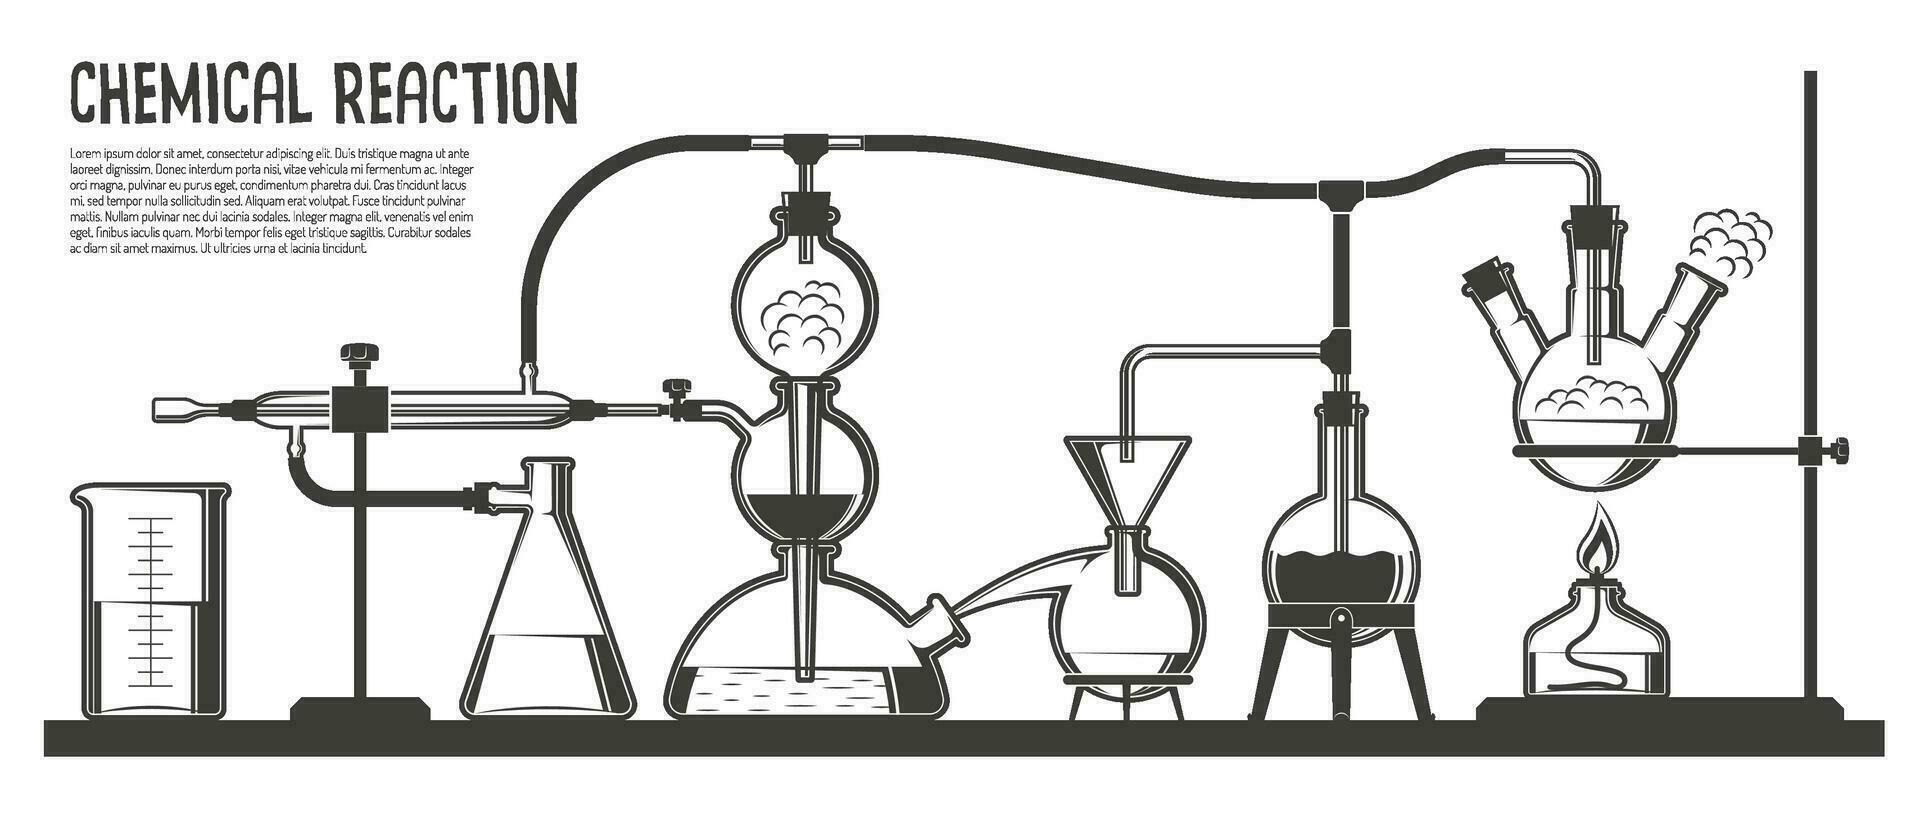 complex chemical process vector